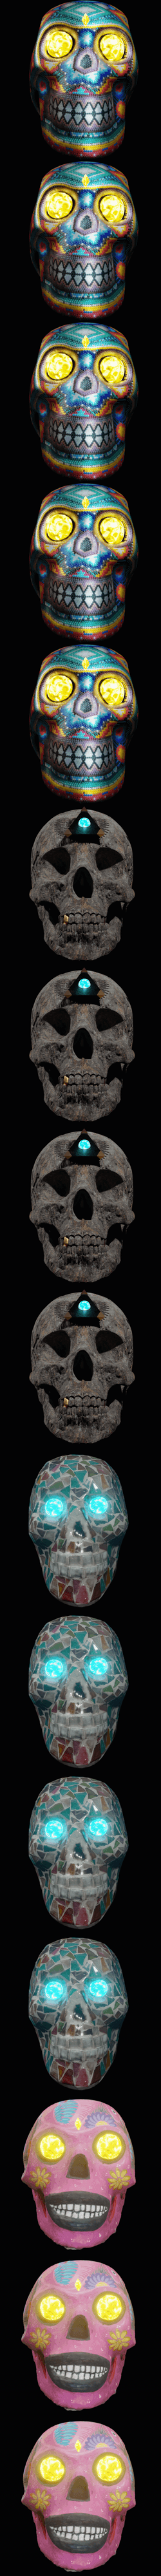 Crypt0Skull collection image